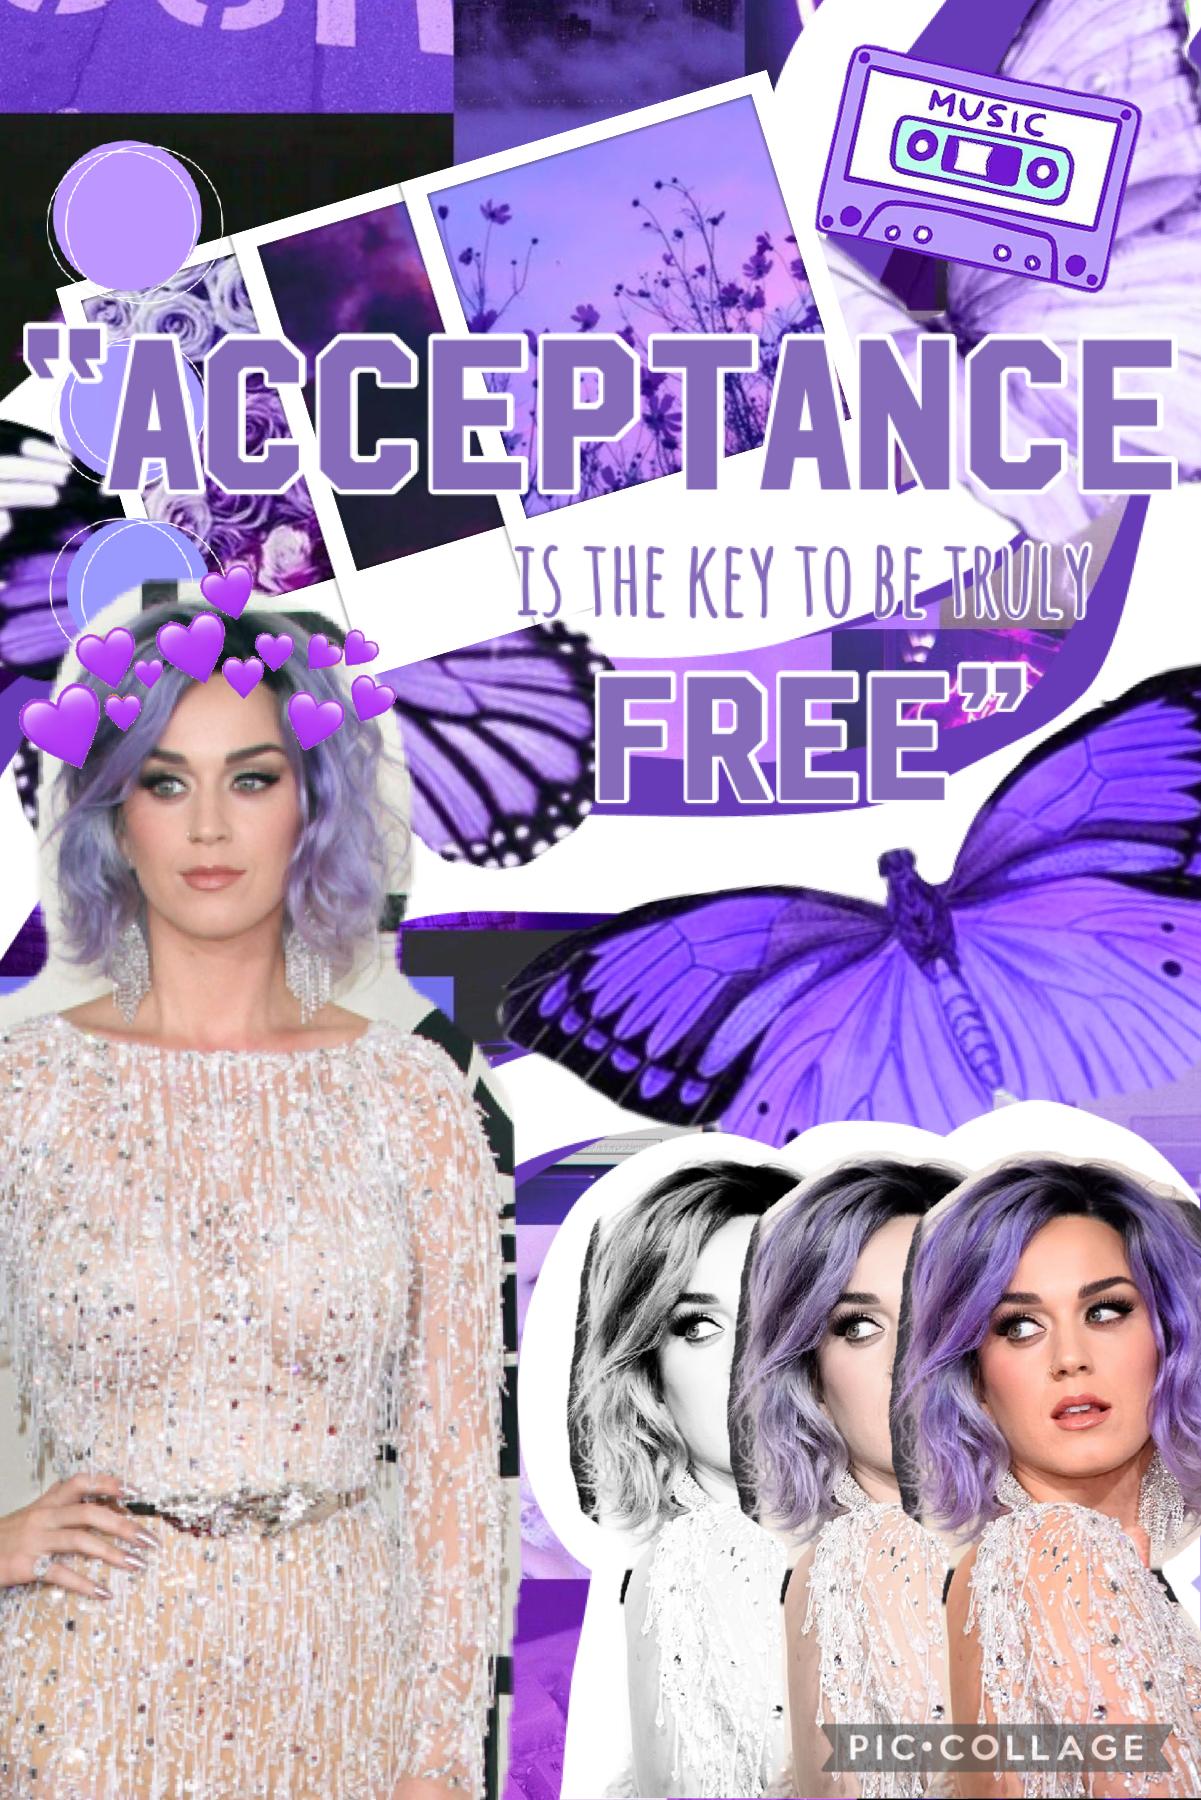 💜 TAP 💜
💜 KATY PERRY ‘Unconditionally’ collage!!  💜💜 i rediscovered this song! 💜
💜 it’s late at night rn… i’m not gonna sleep heh 💜
💜 what even is sleep? 💜
💜 my head hurts lol 💜